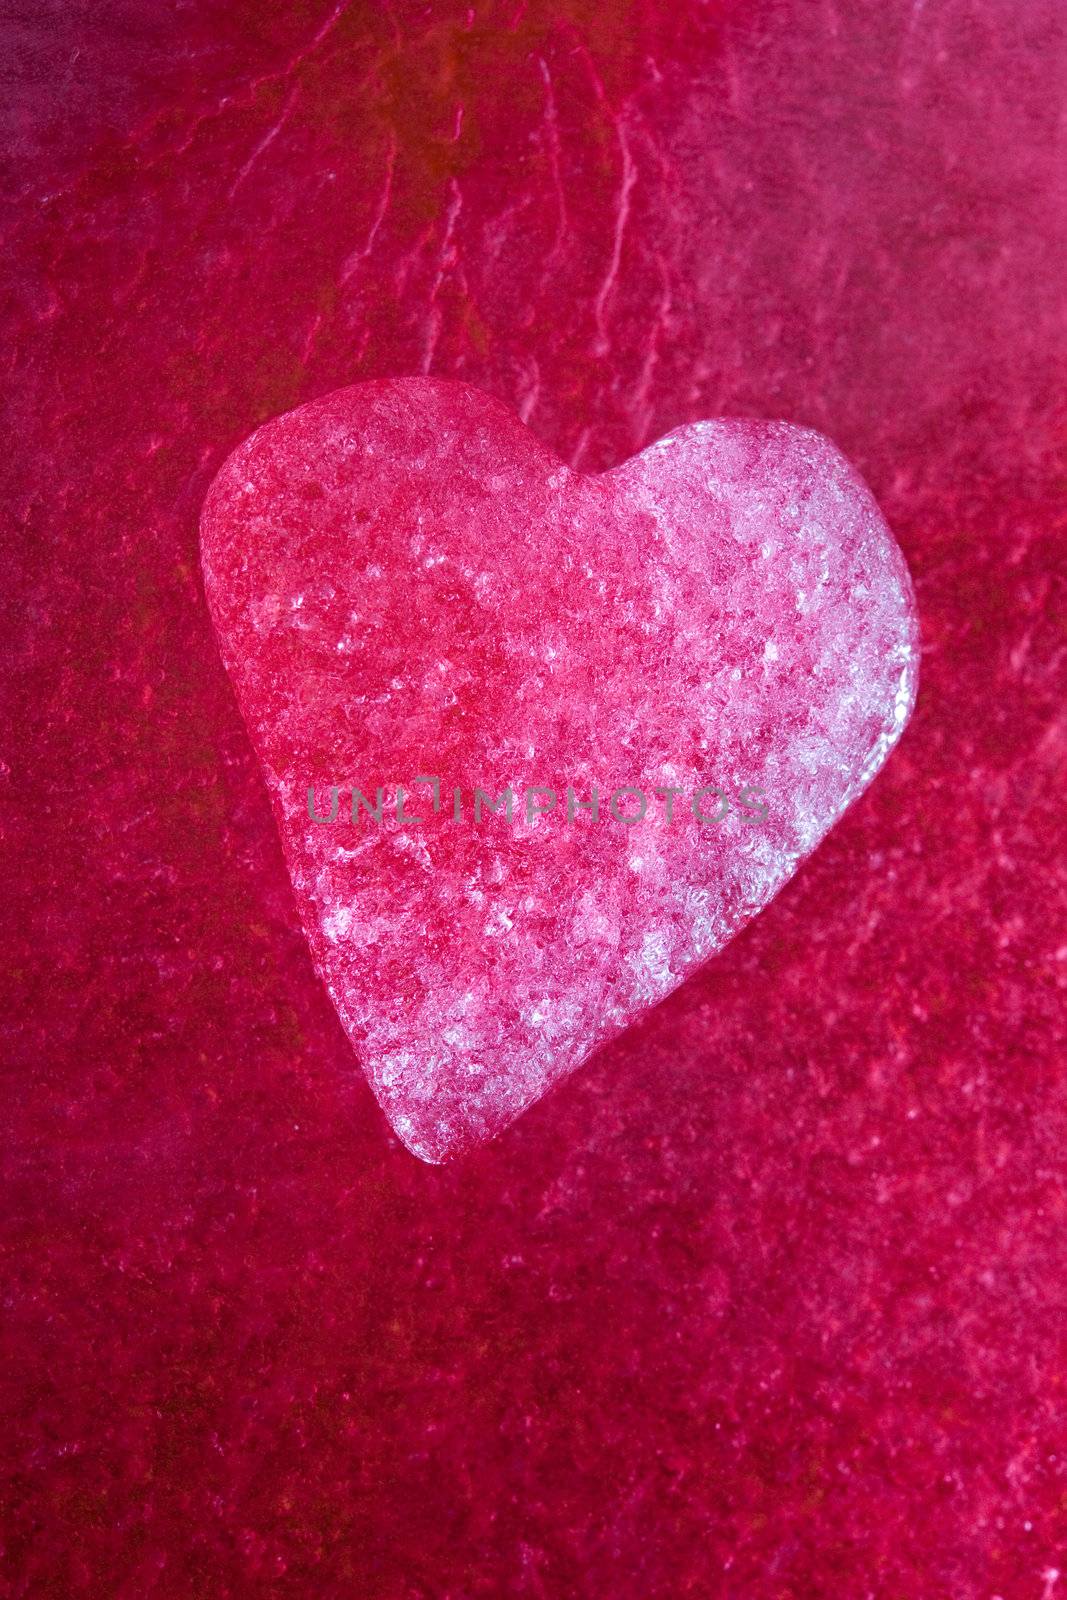 Icy red heart by velkol